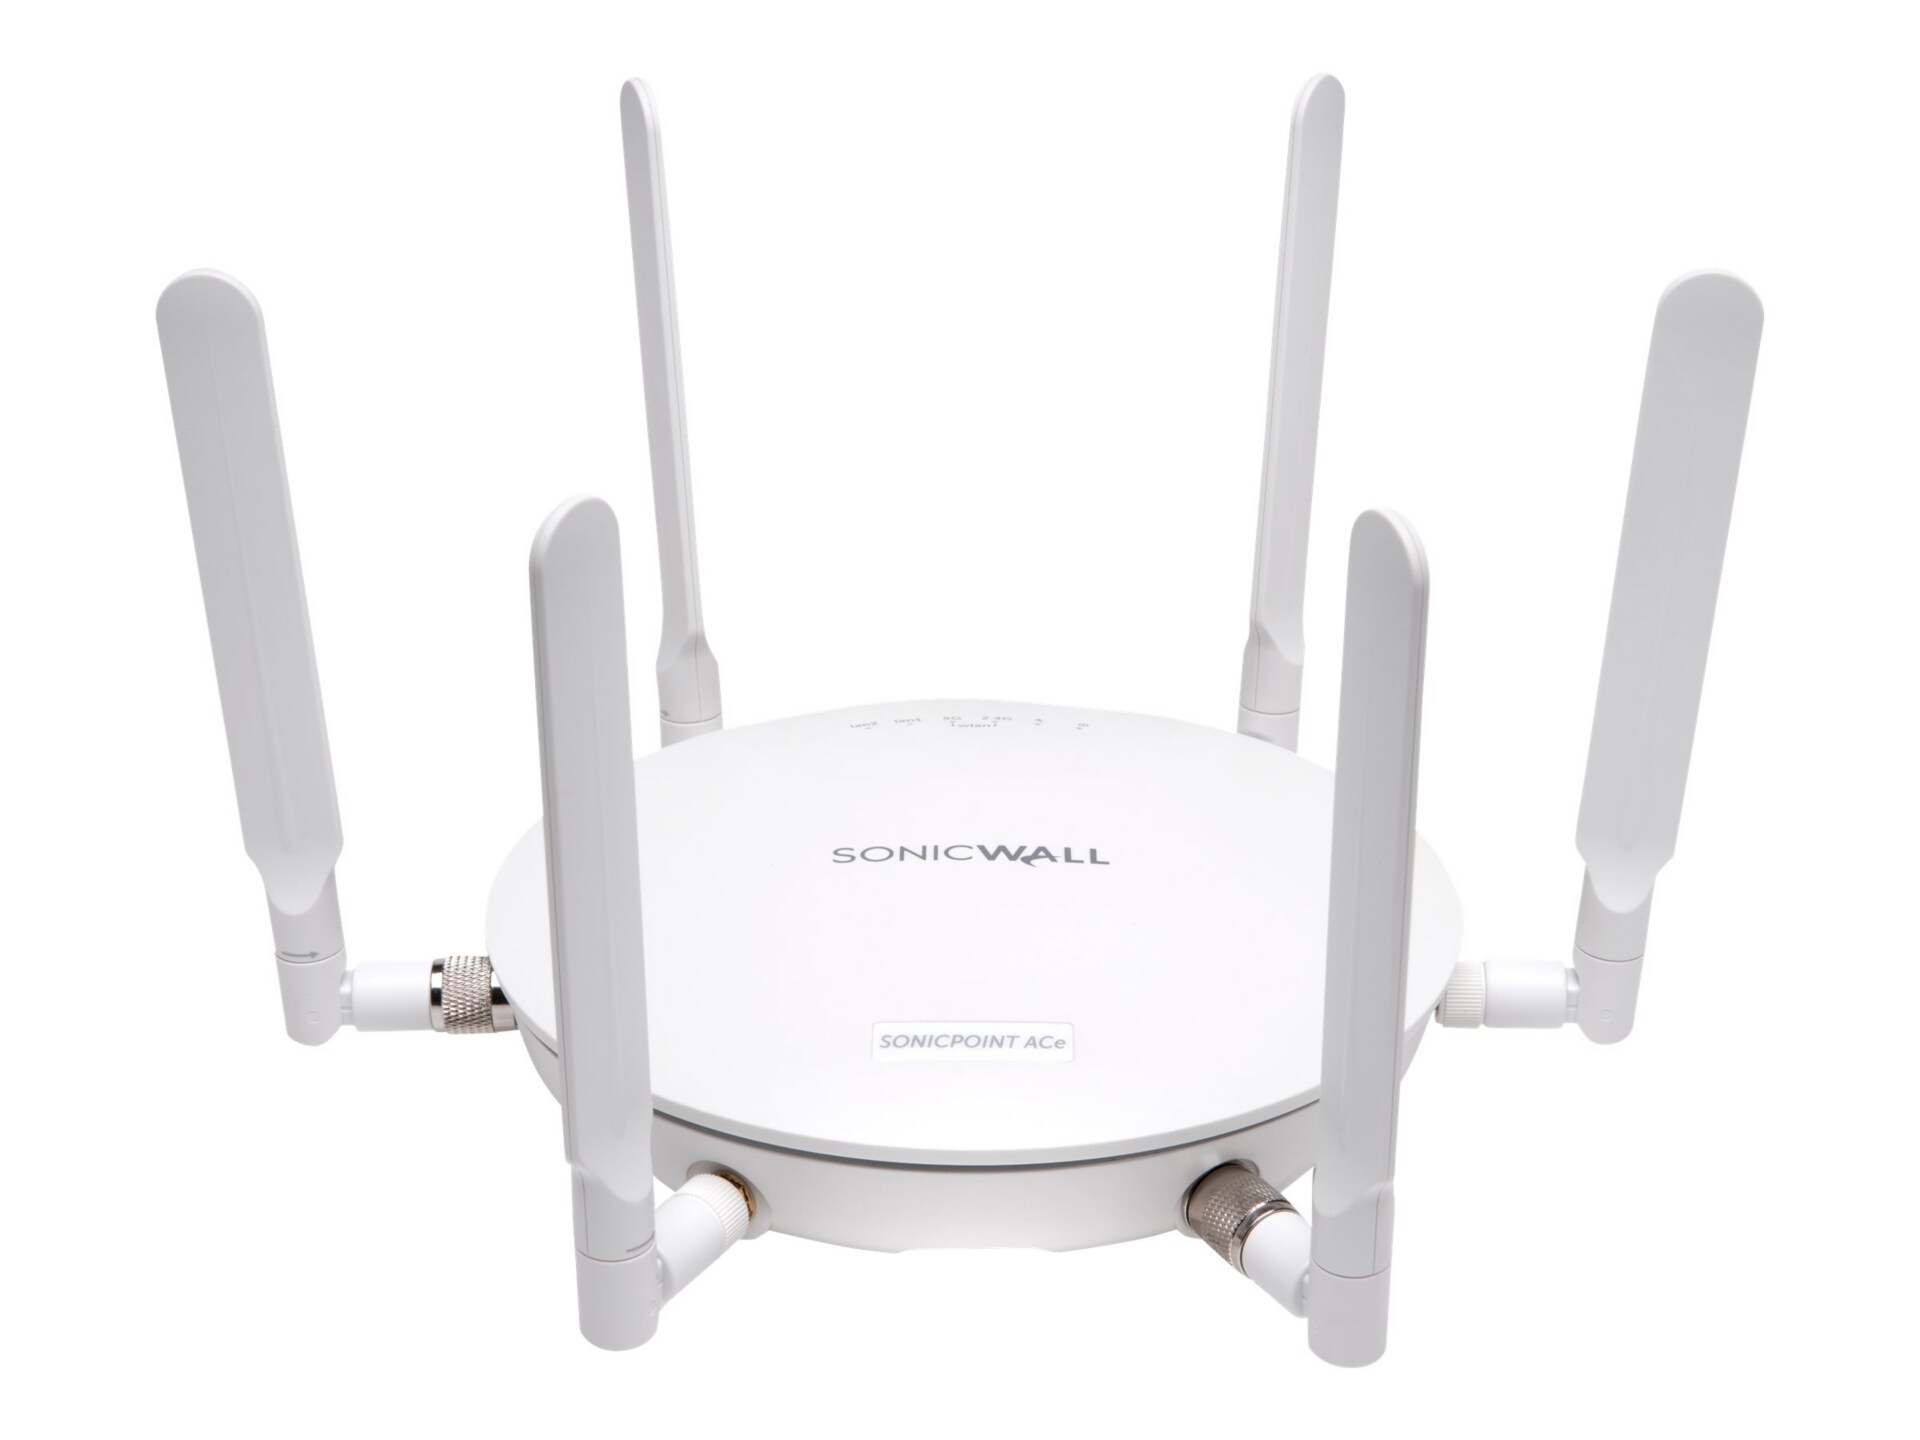 SonicWALL SonicPoint Ace with SonicWALL 802 Wireless Access Point